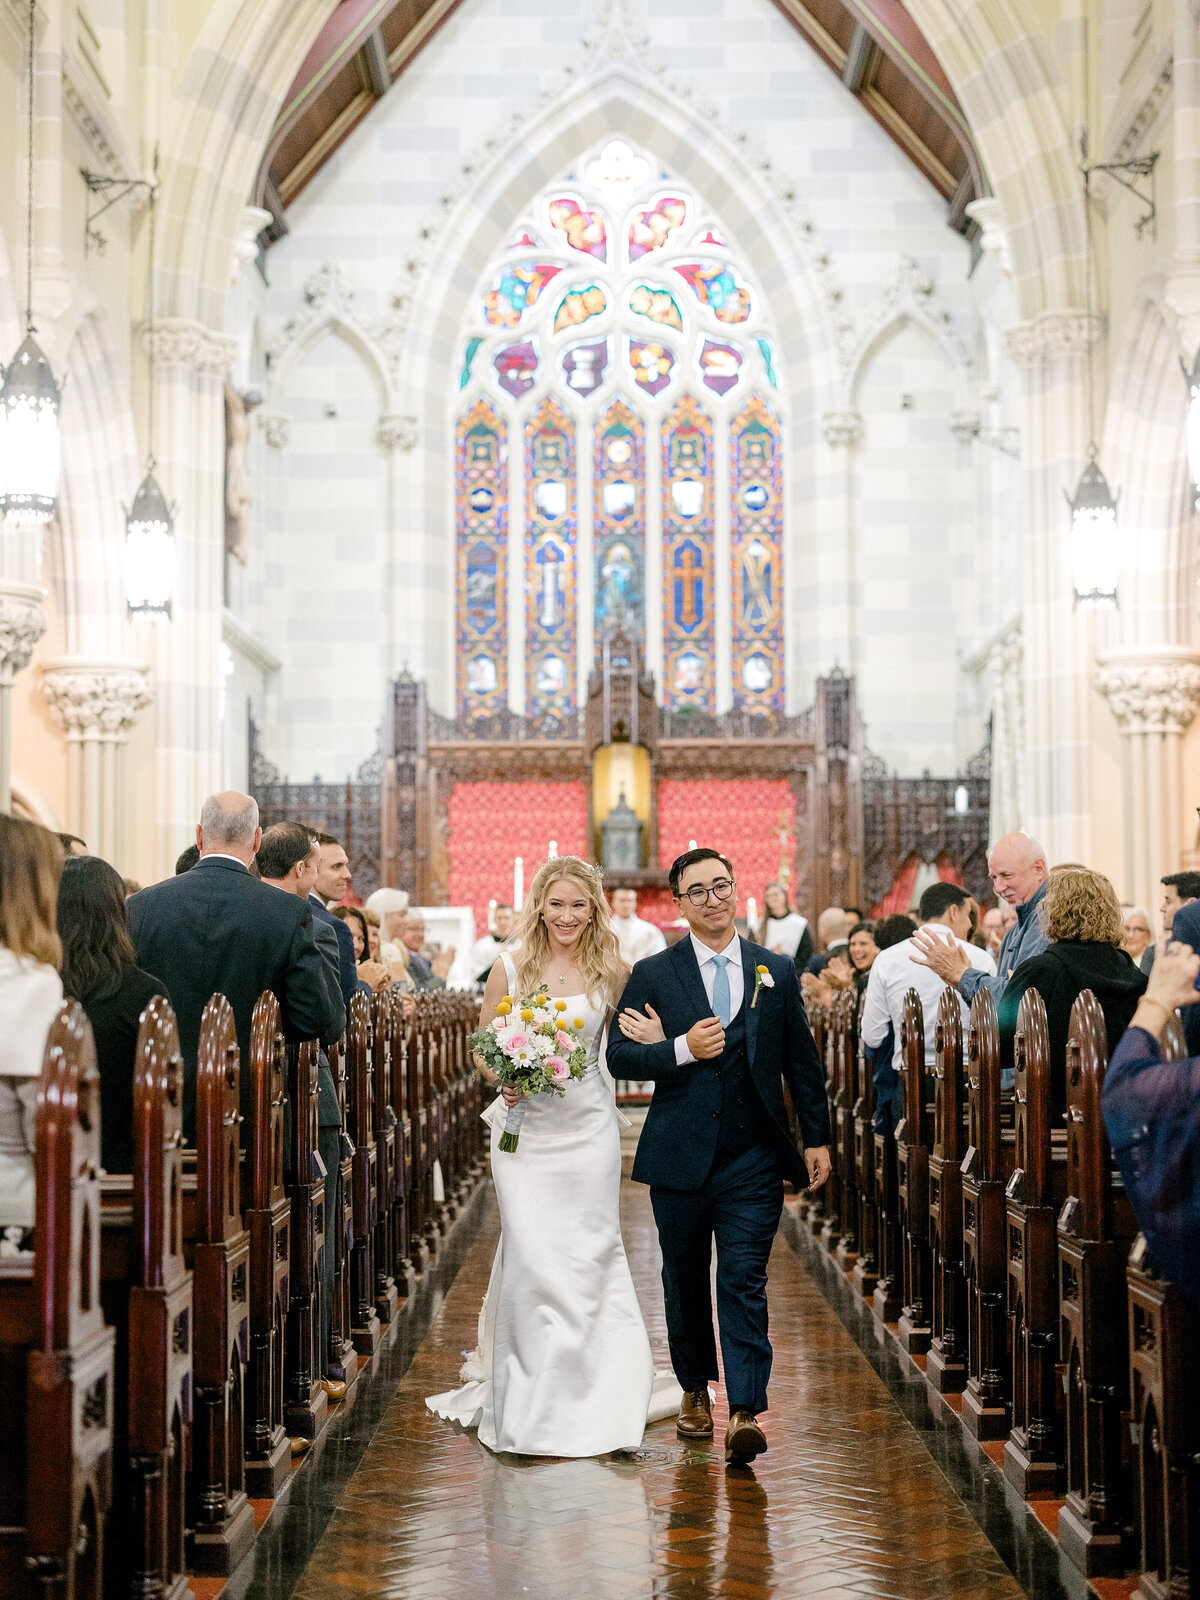 Bride and groom walking back down the aisle in an ornate church with stained glass windows